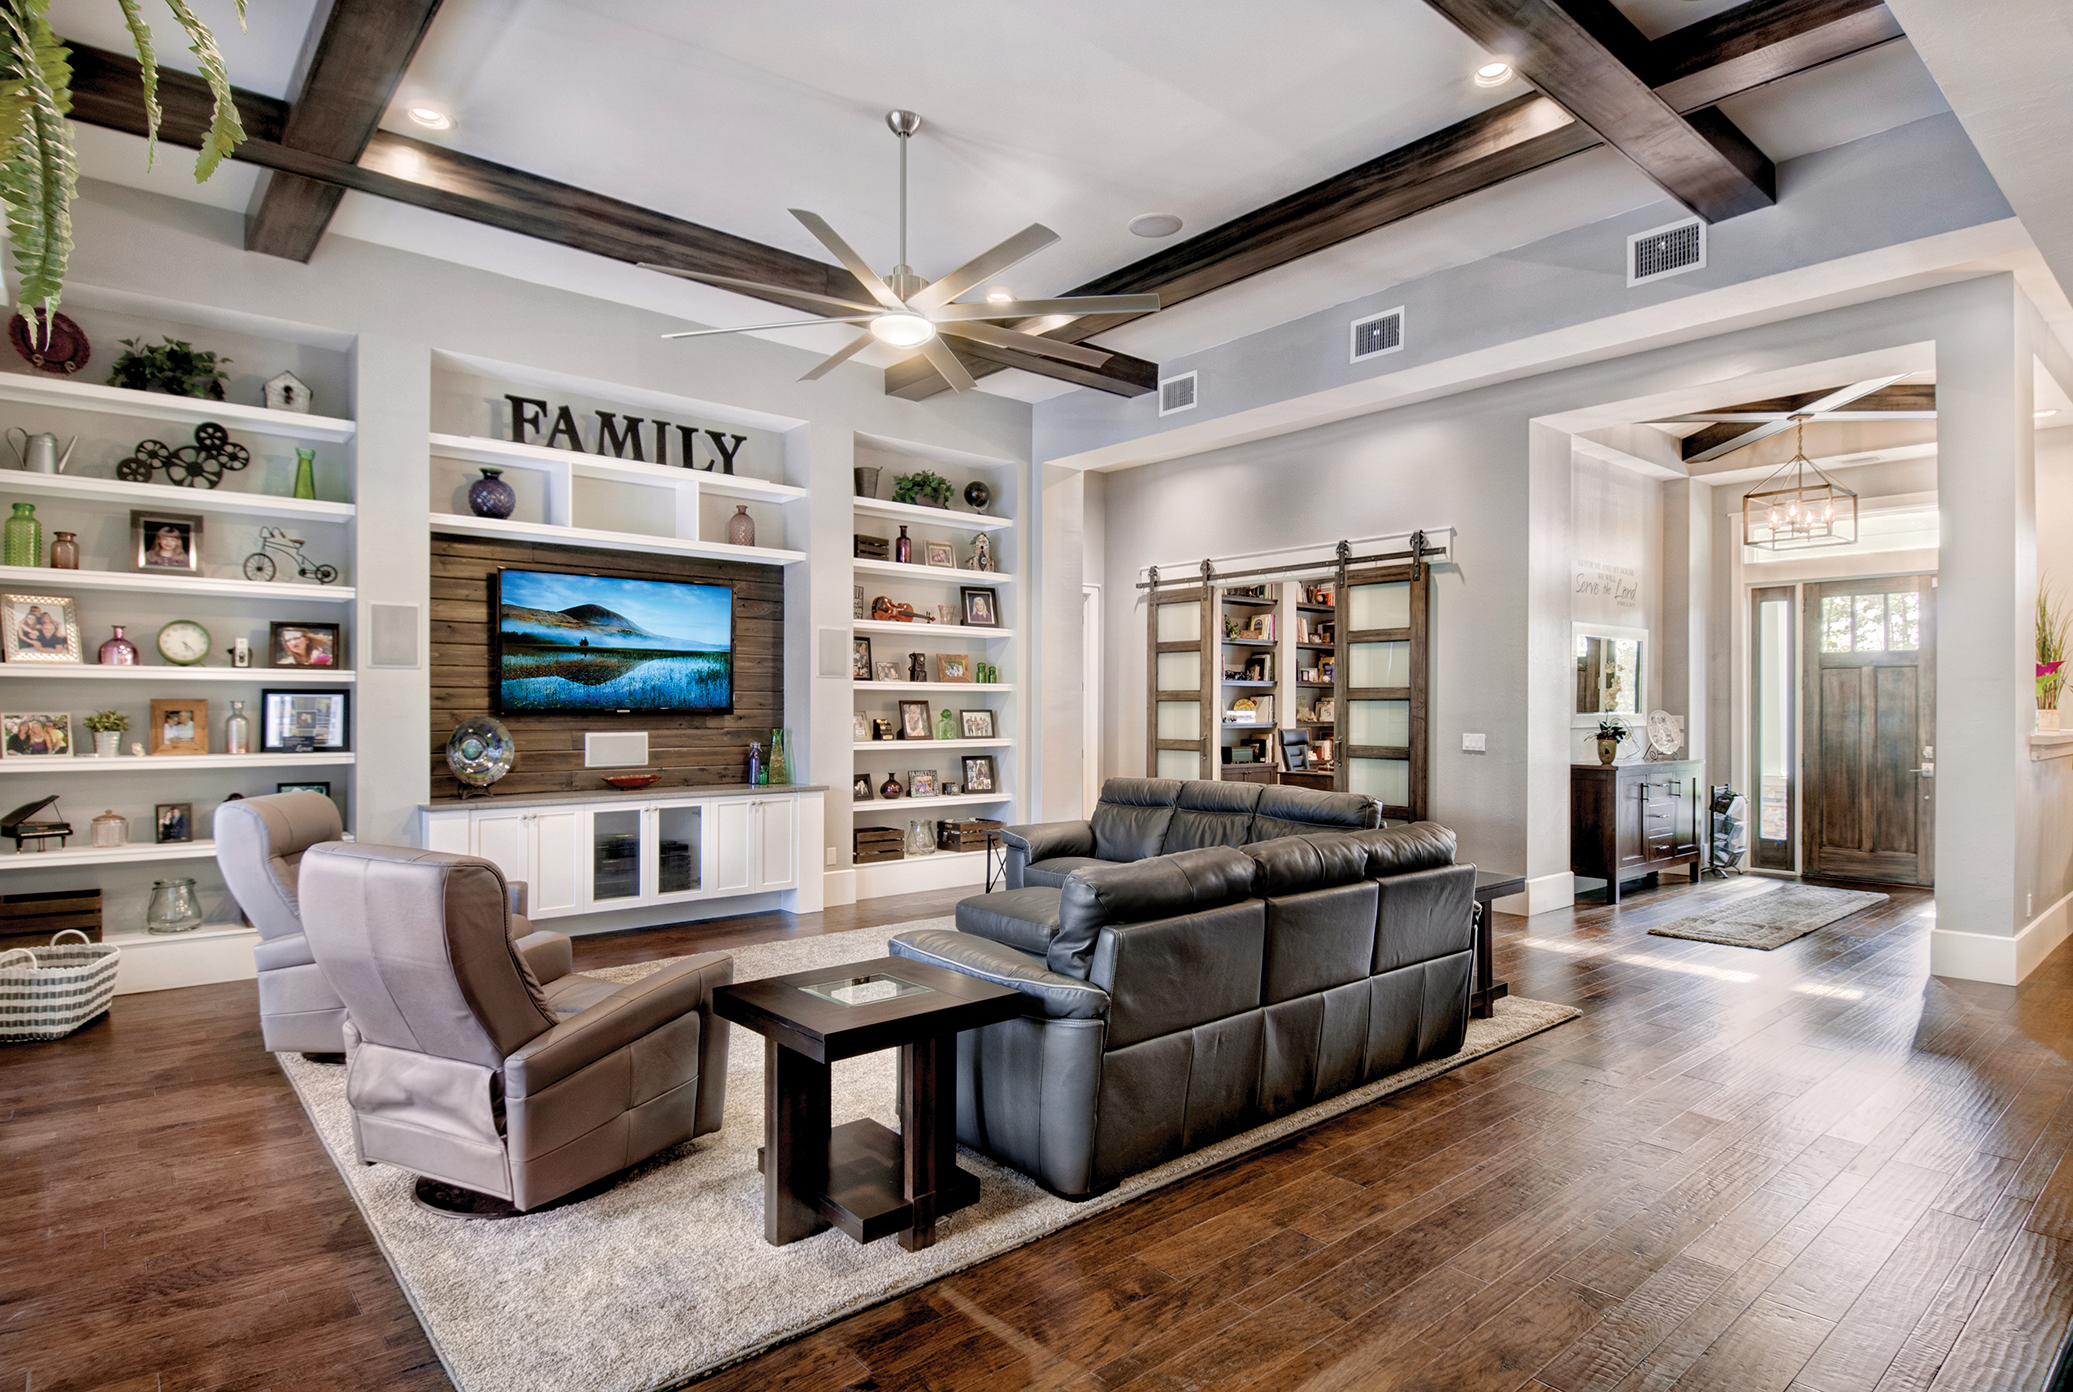  The focal point of the comfortable great room is a set of built-ins with a repurposed wood accent. “We were able to take some of the leftover wood from the ceilings on the lanai and use it in the great room,” says Sater. “It’s so much better to look